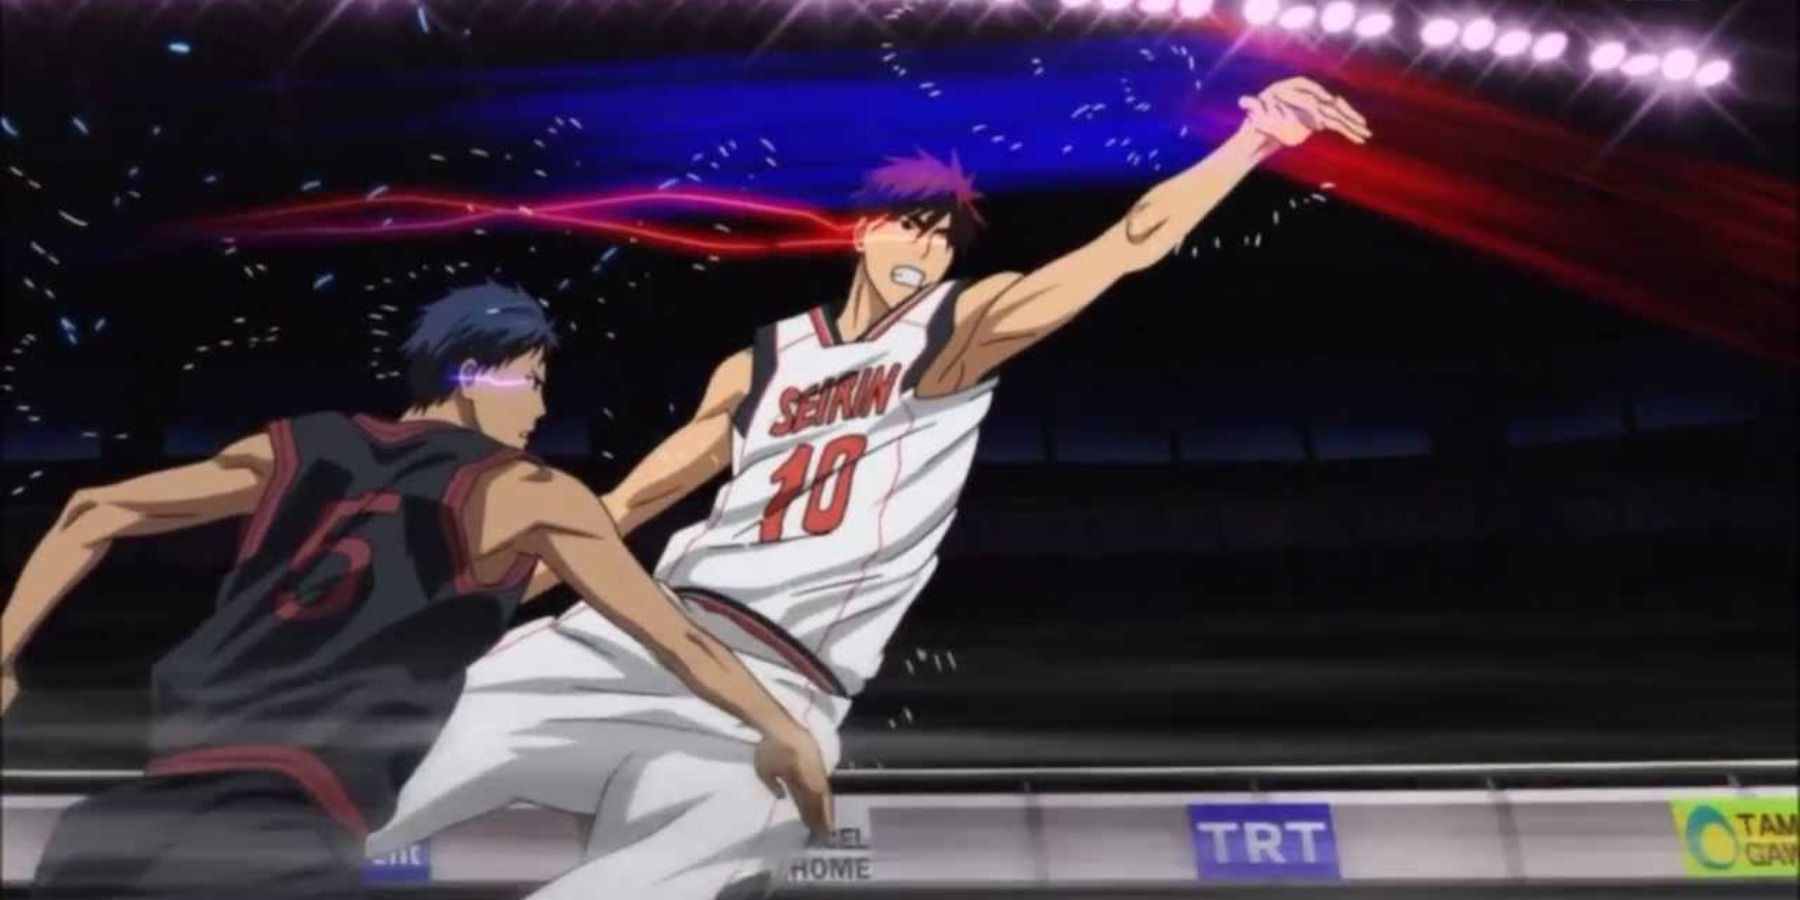 aomine and kagami competing against each other after they entered the zone